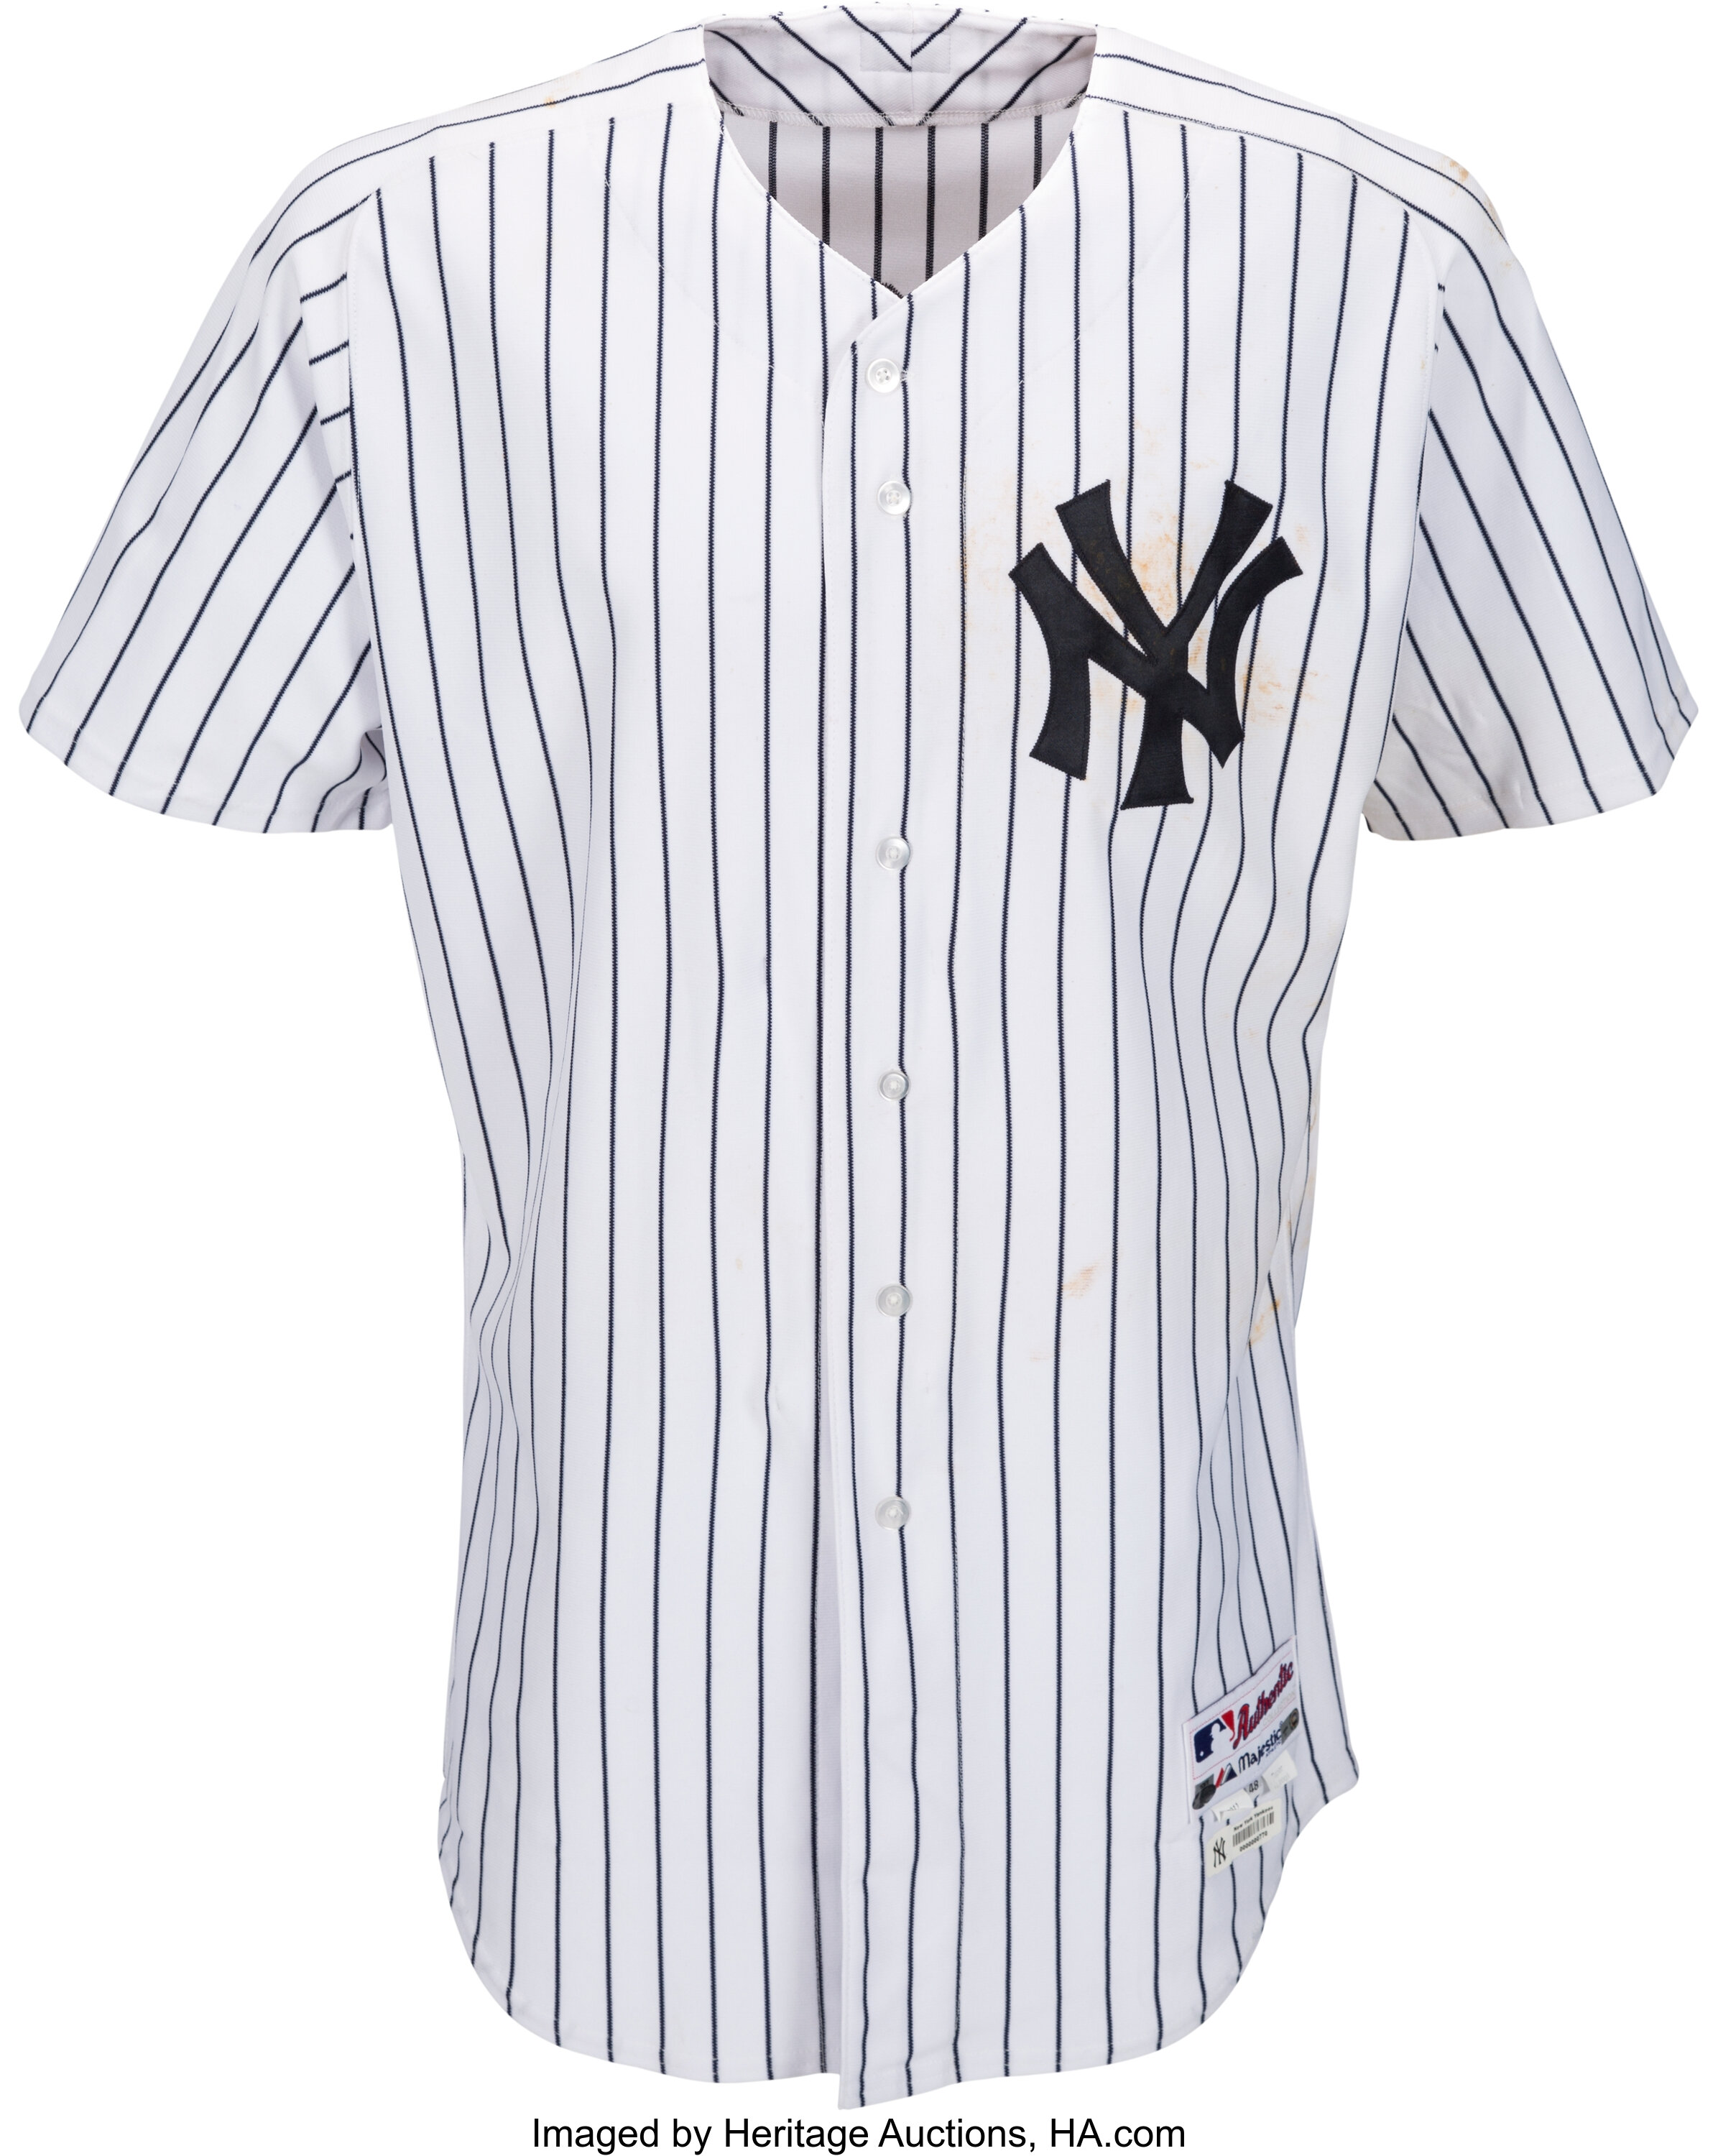 Alex Rodriguez Game-Used New York Yankees Majestic Jersey (Steiner